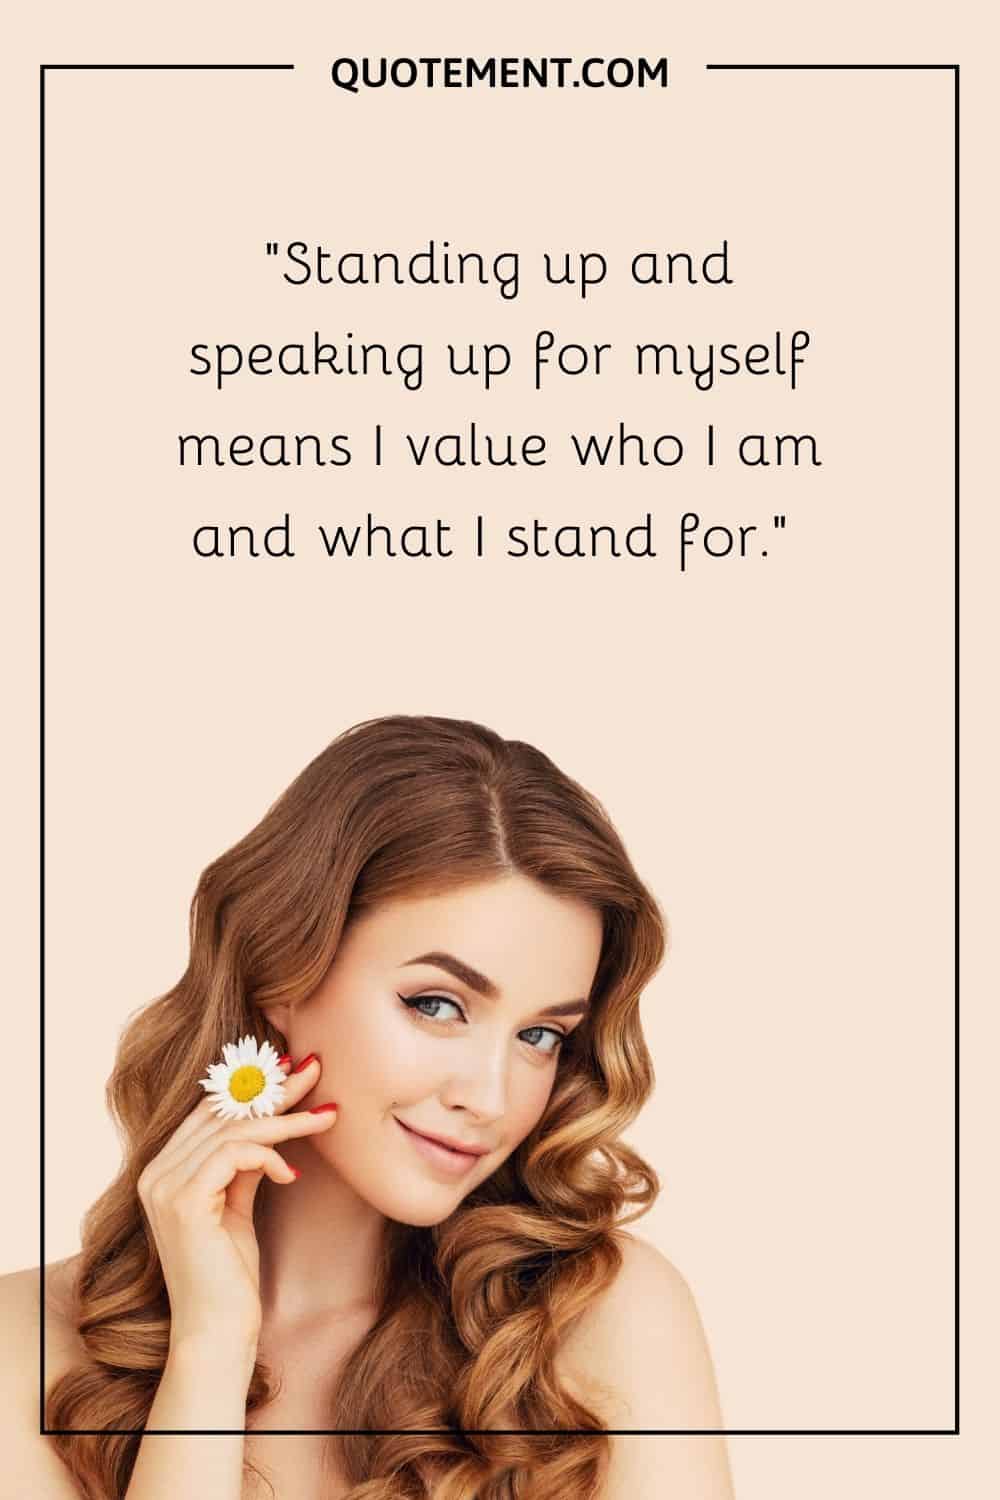 Standing up and speaking up for myself means I value who I am